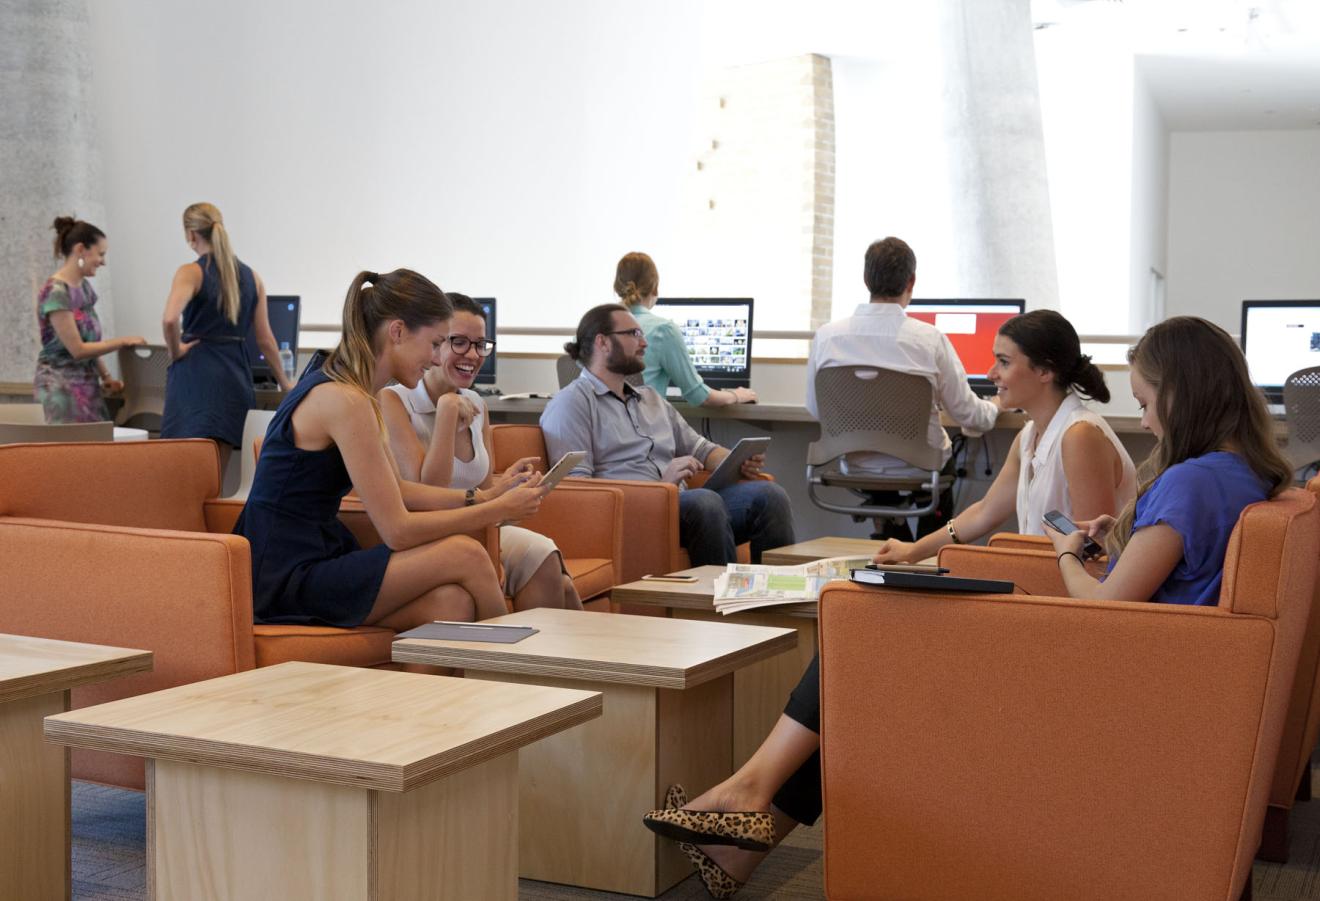 The graduate lounges on level four feature informal student seating to relax, study and connect. There is a well equipped kitchen and many power point plugs available for student convenience.